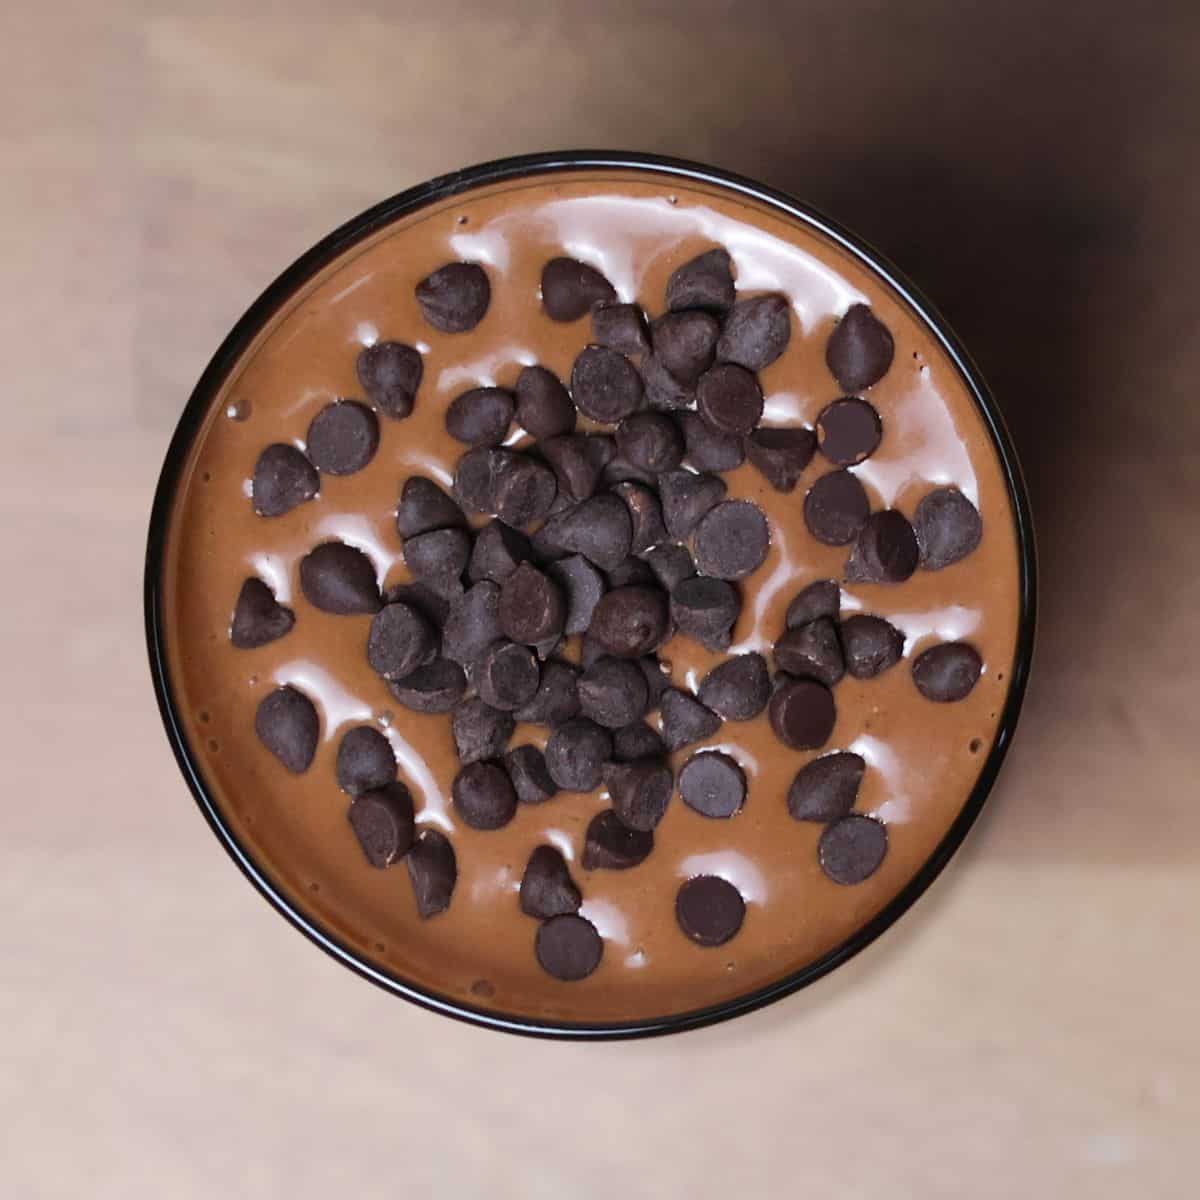 A chocolate peanut butter smoothie with creamy texture is garnished with chocolate chips.